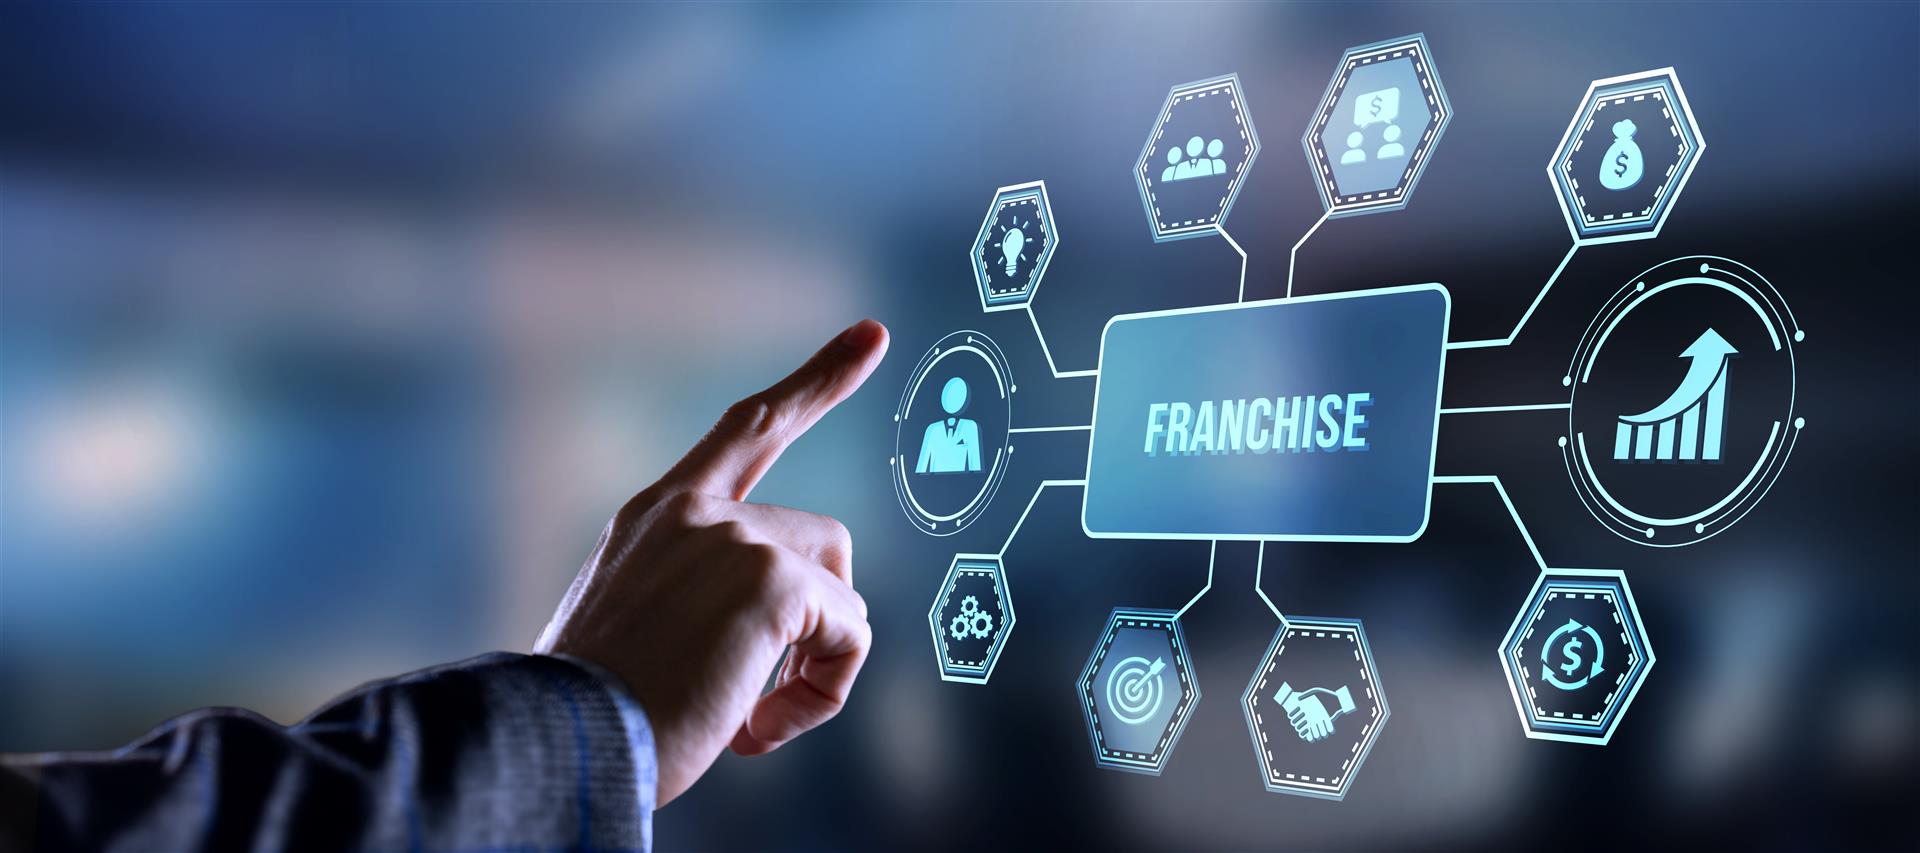 10 Franchising Terms You Need to Know